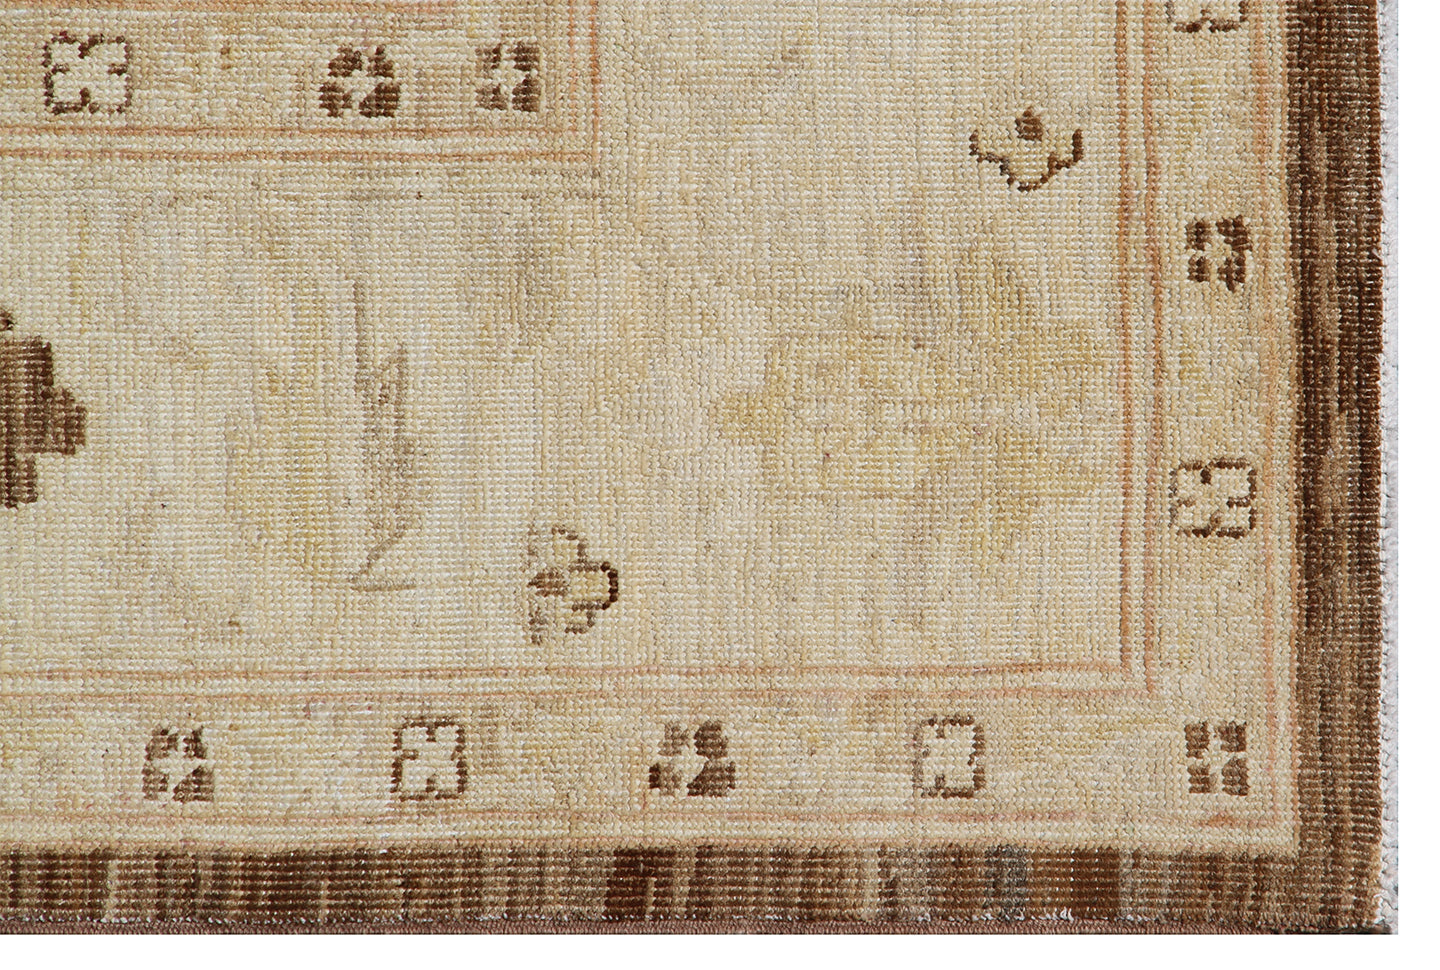 6'x8' Sultanabad Design Ariana Transitional Brown Ivory Rug